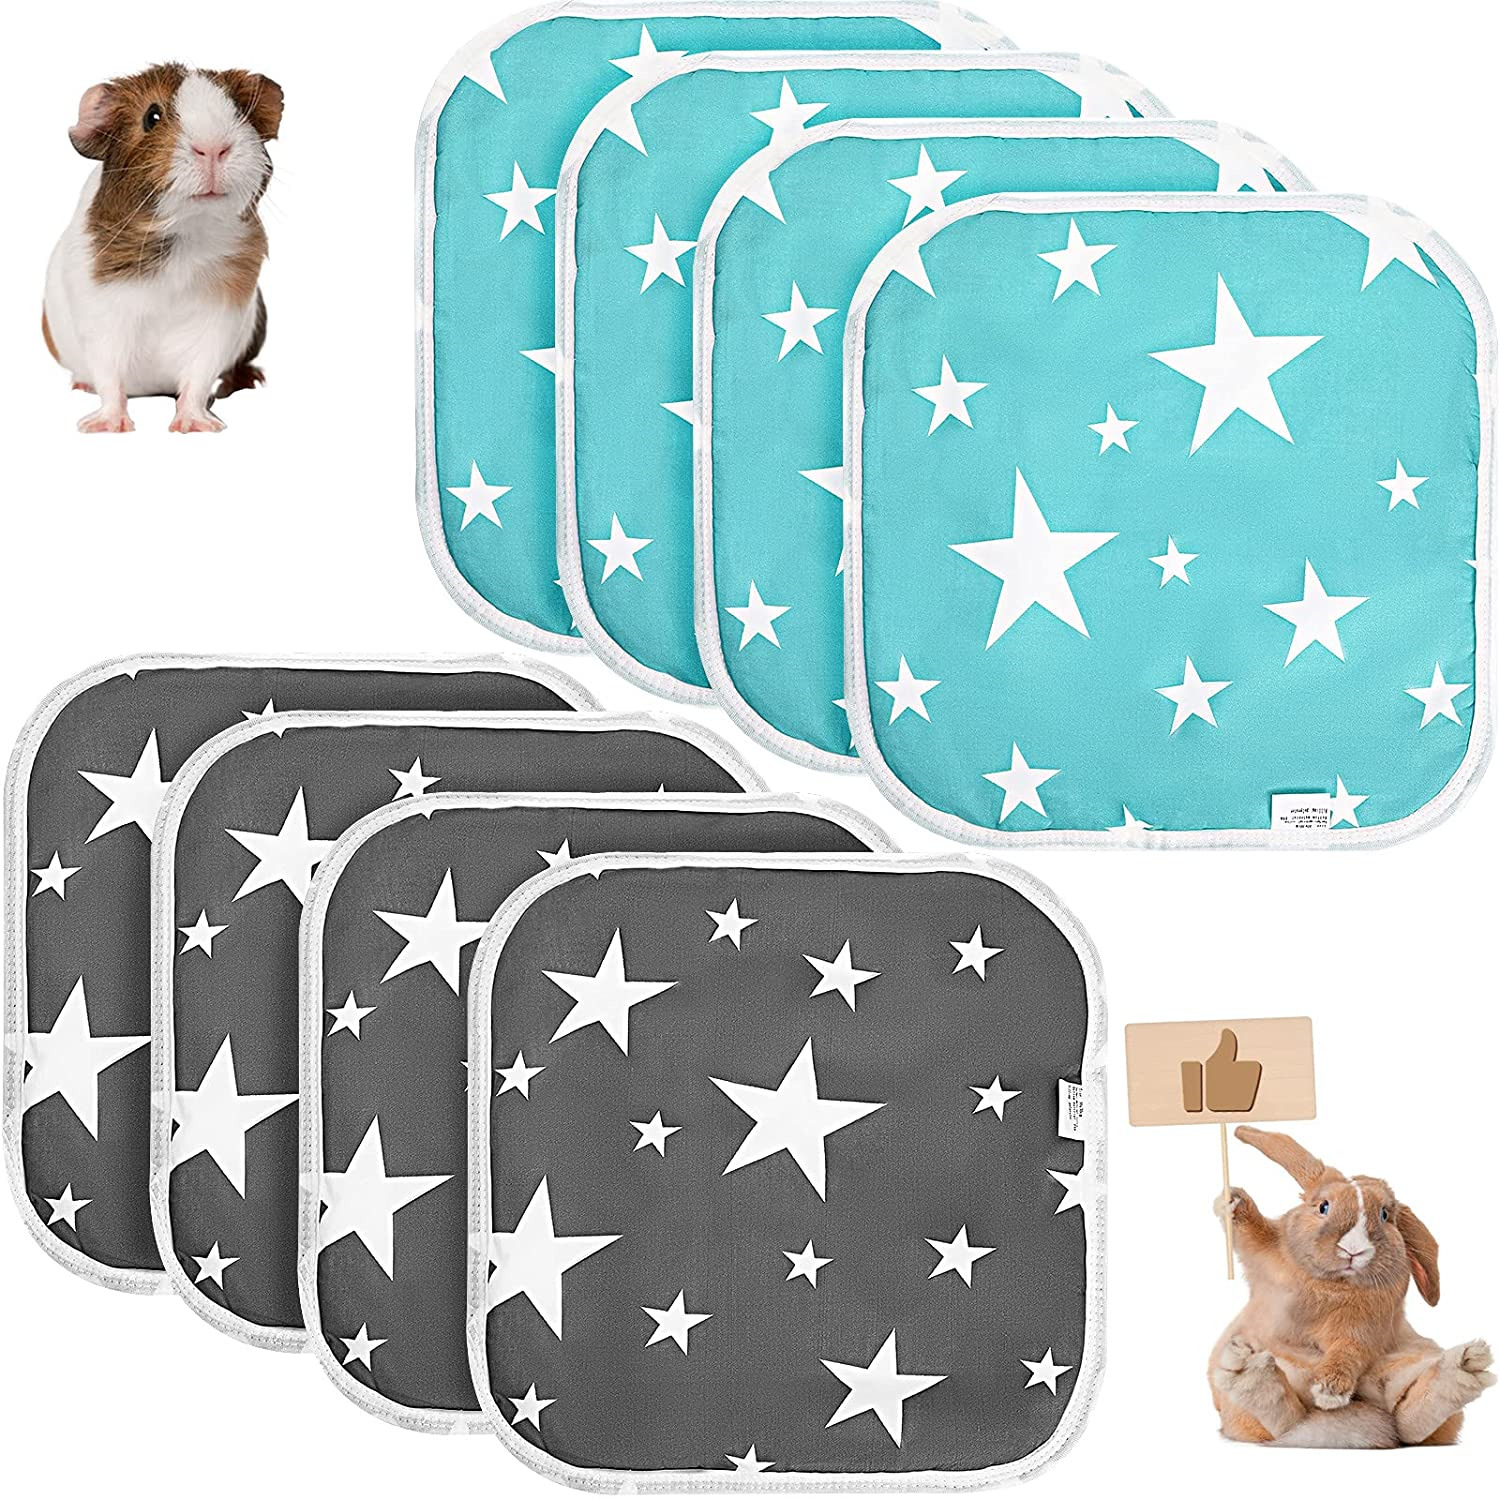 8 Pieces Guinea Pig Cage Liners Washable And Reusable Small Animal Pee Pads Pet